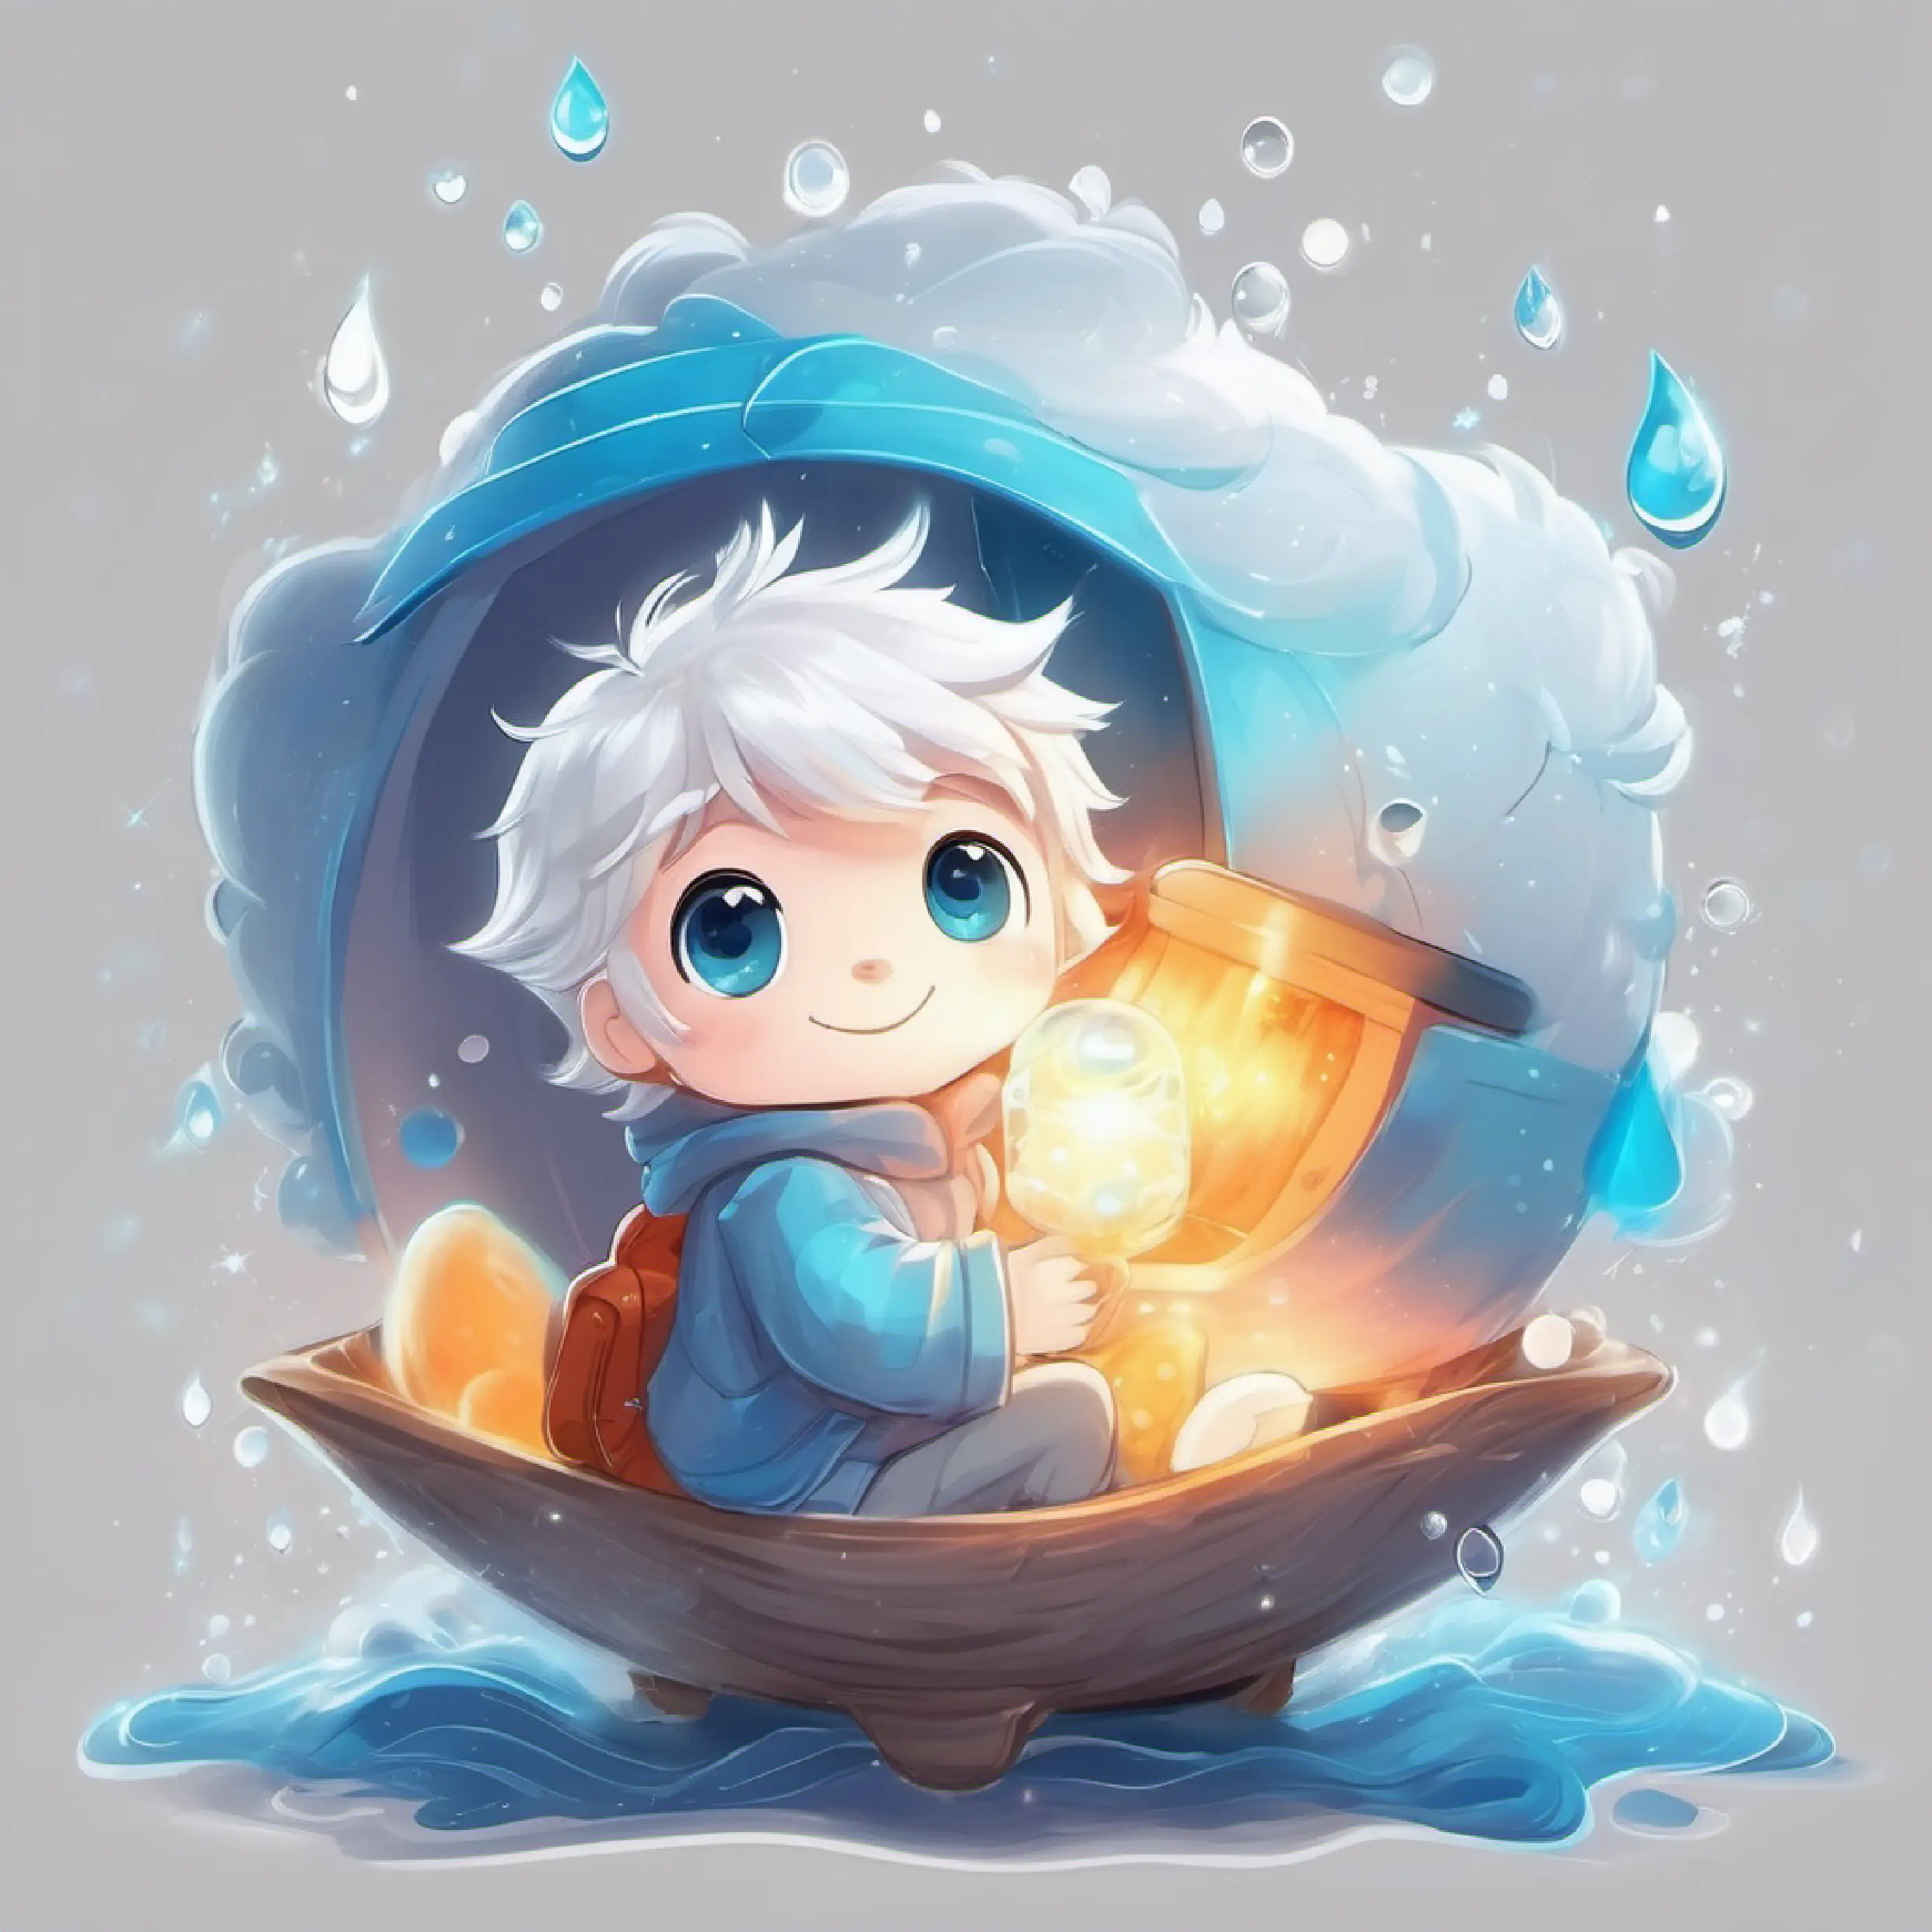 a wisp of steam, light gray, with gentle, caring eyes arrives to join a droplet with sparkling blue eyes, cheerful and energetic and a cube with frosty white hair, chills out with a smile.